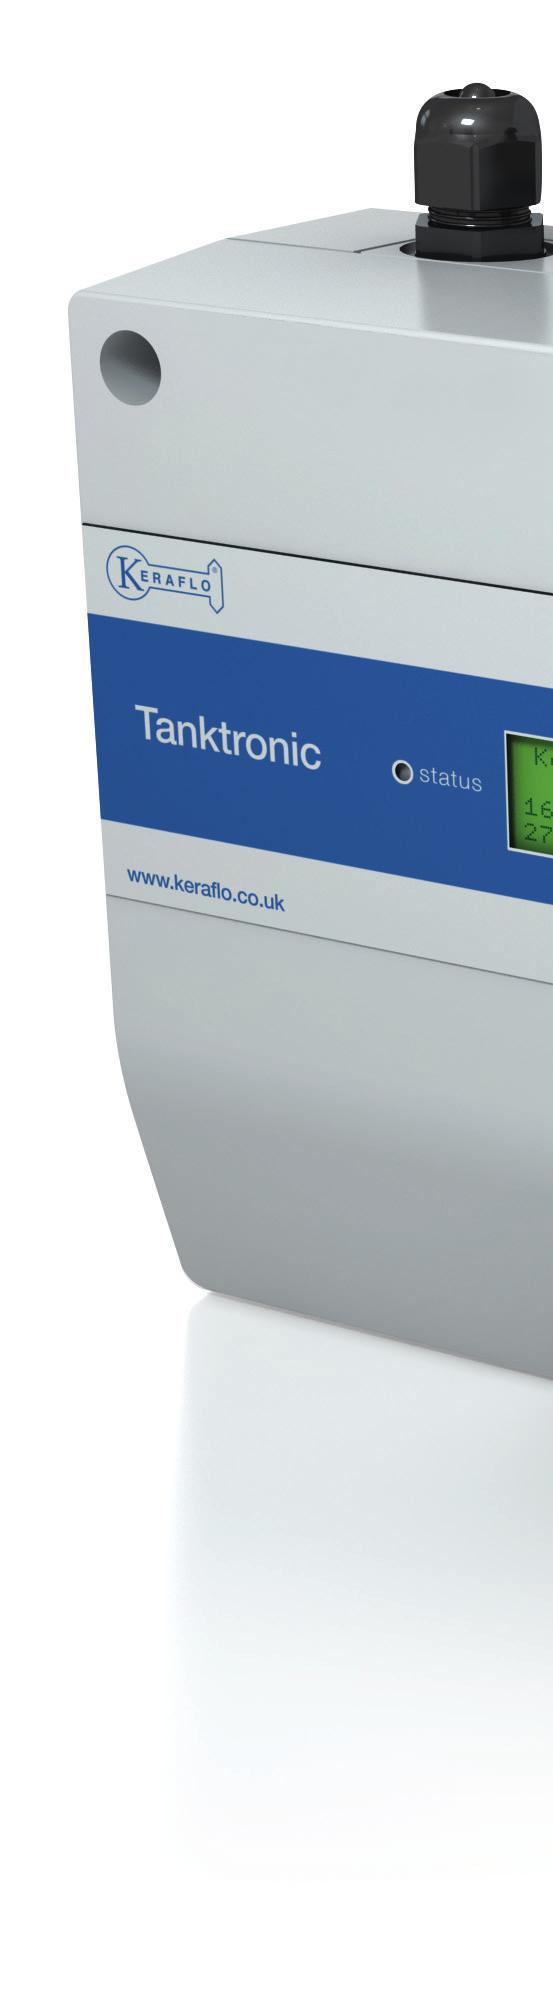 THE MODERN SOLUTION TO MONITORING AND controlling WATER STORAGE TANKS Tanktronic is an electronic tank management system which monitors water levels and temperature.